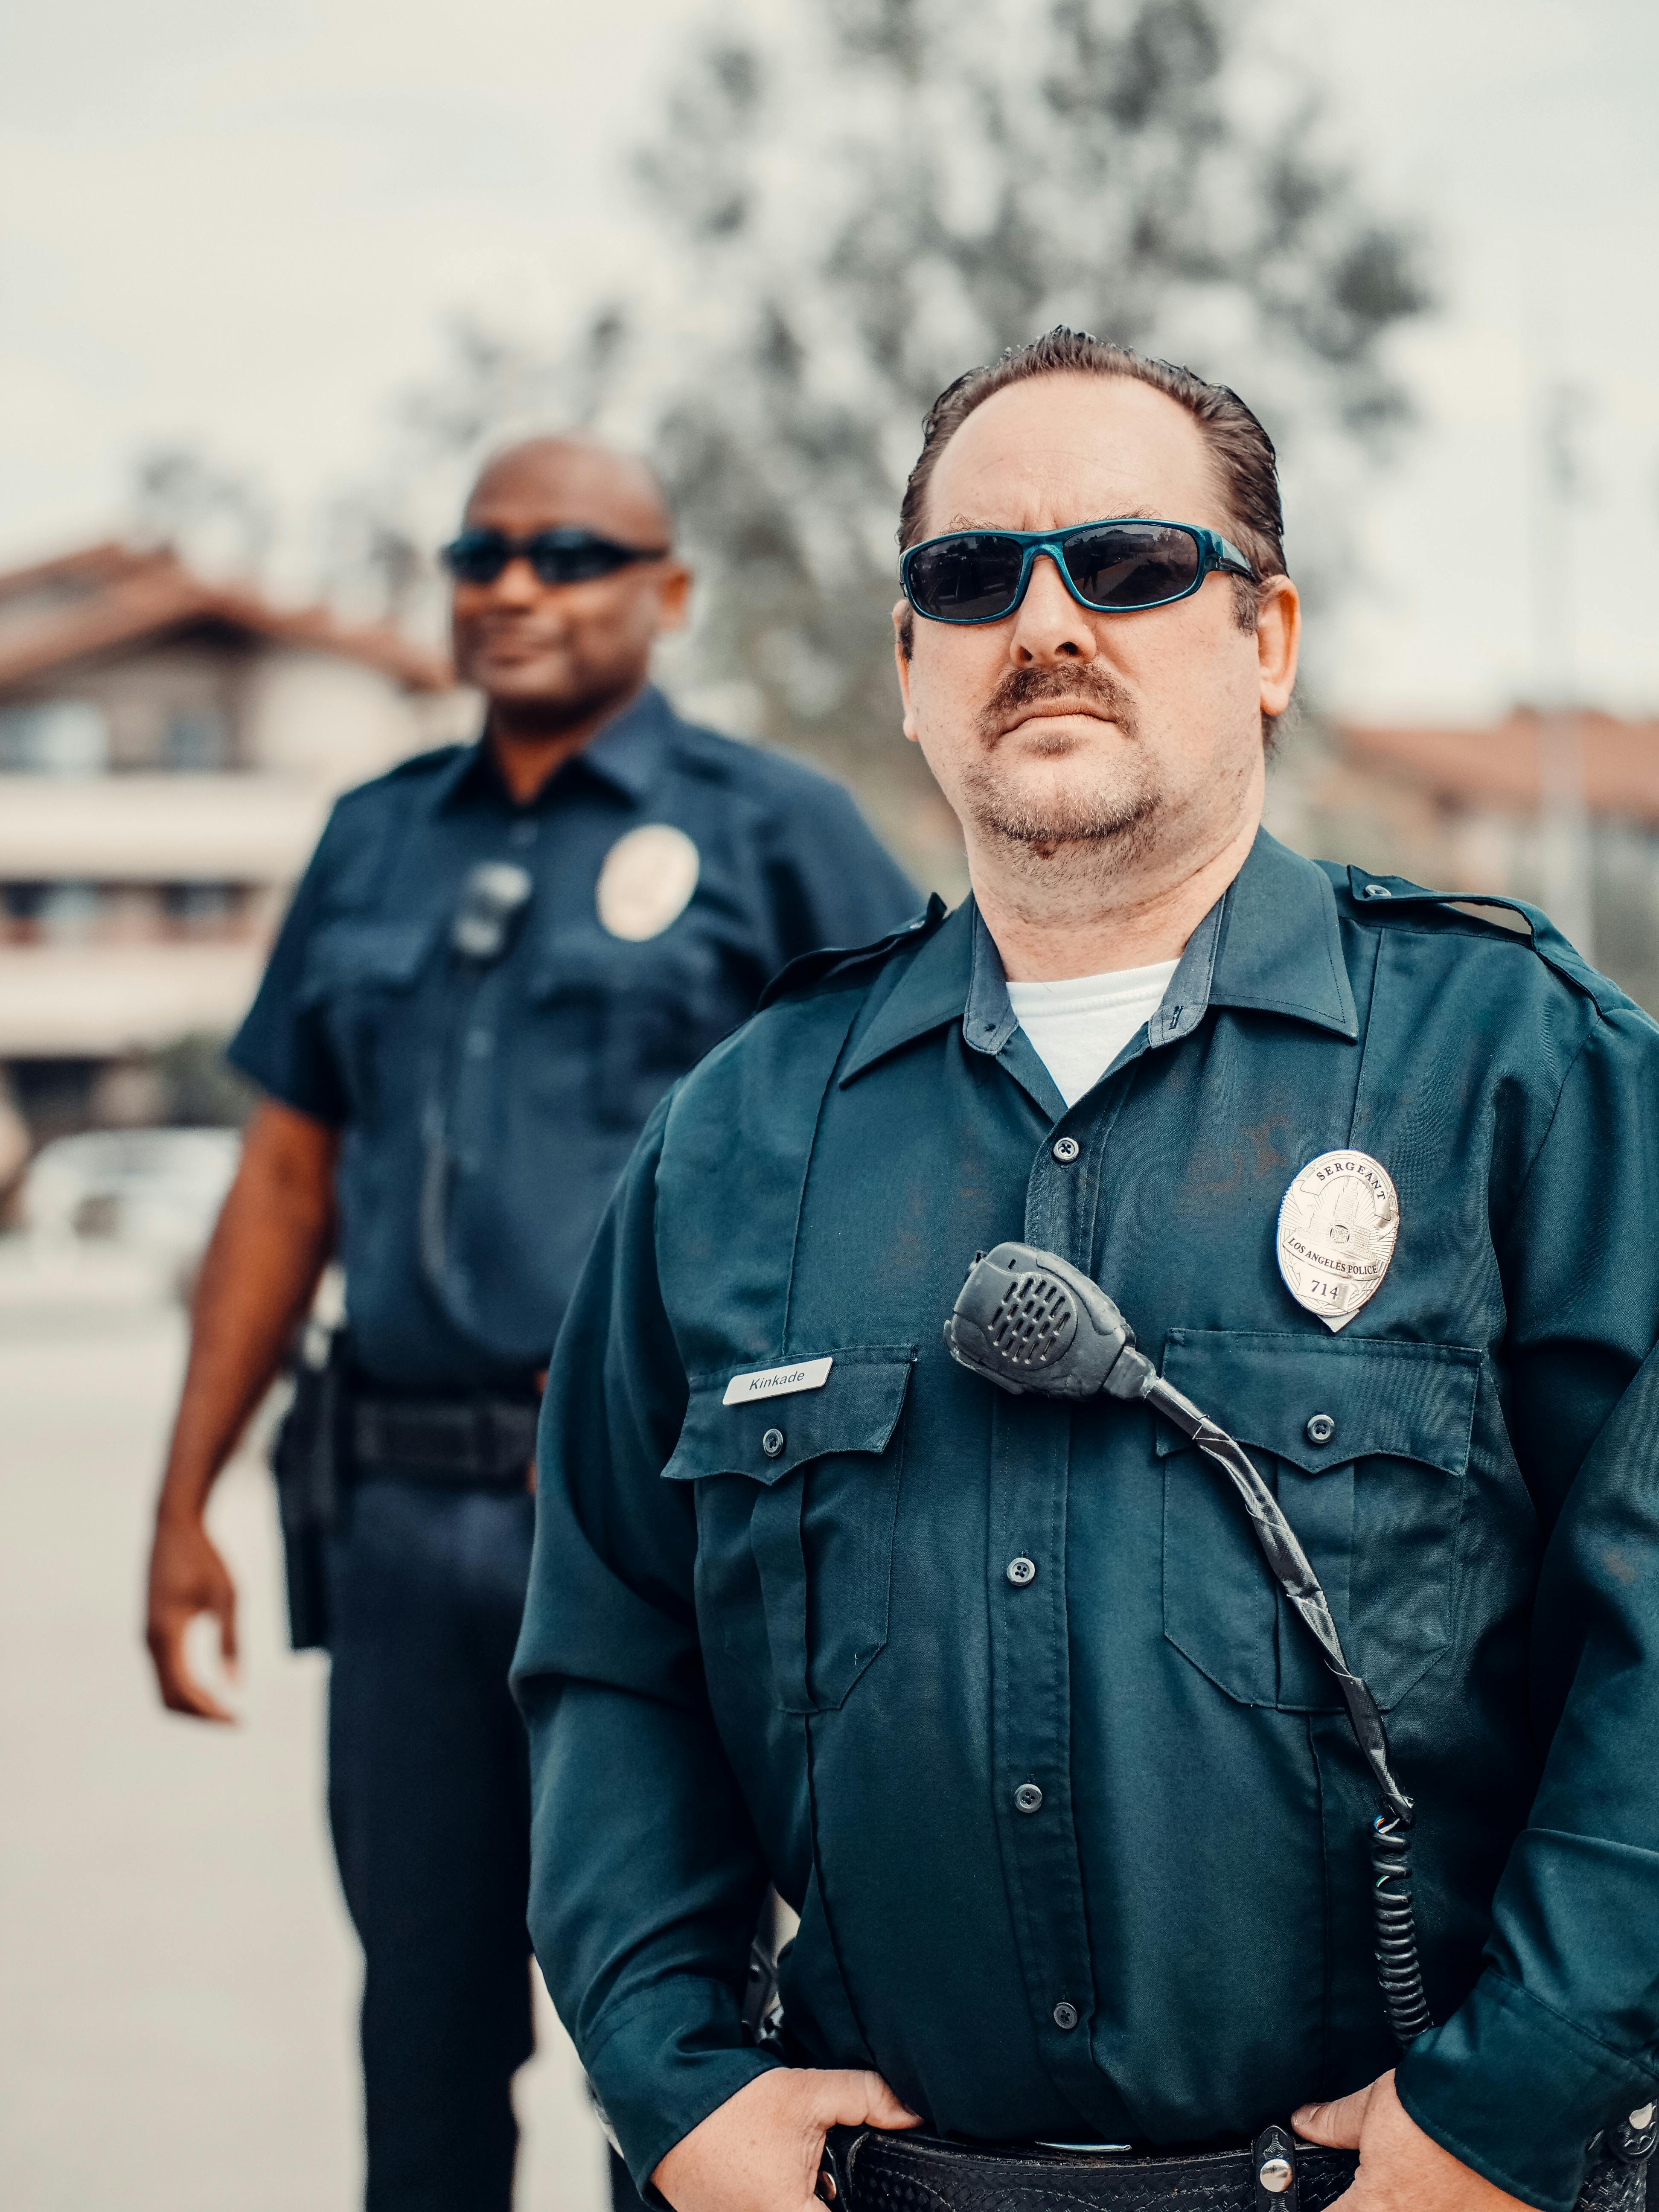 A somber-looking policeman standing behind a colleague | Source: Pexels